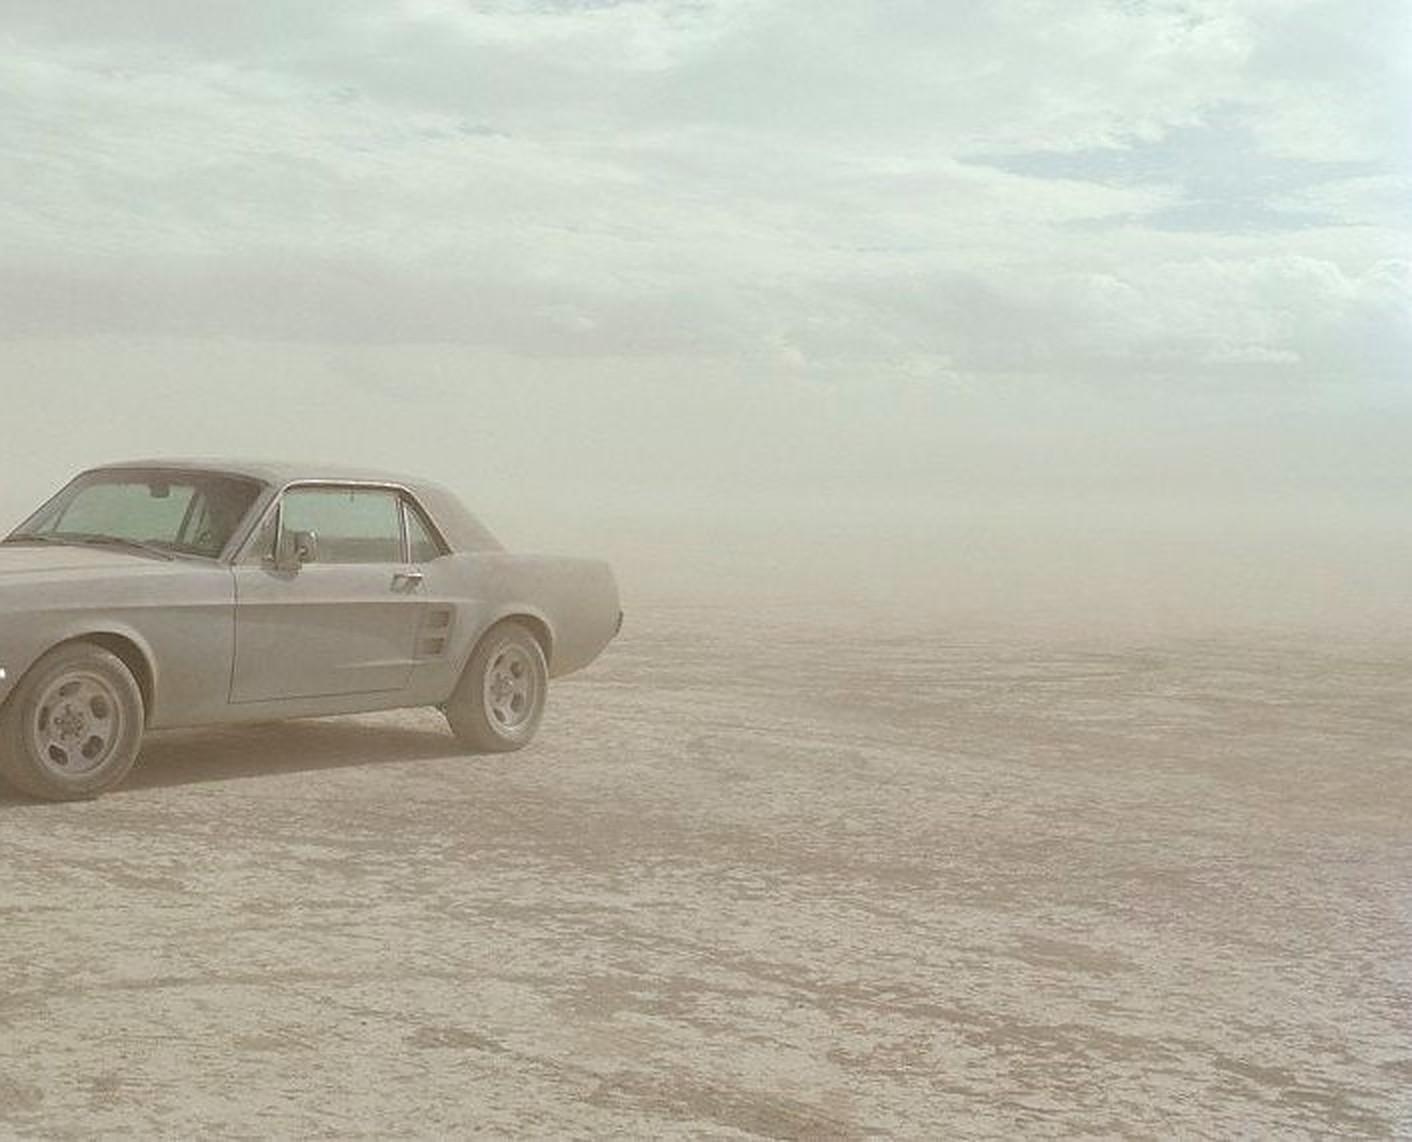 Please bear in mind that all prints are produced to order and lead times are estimated between 15-20 days.

Mustang, El Mirage, California is a stunning C-Type Print by contemporary photographer Samuel Hicks. 
It is available in this size in an